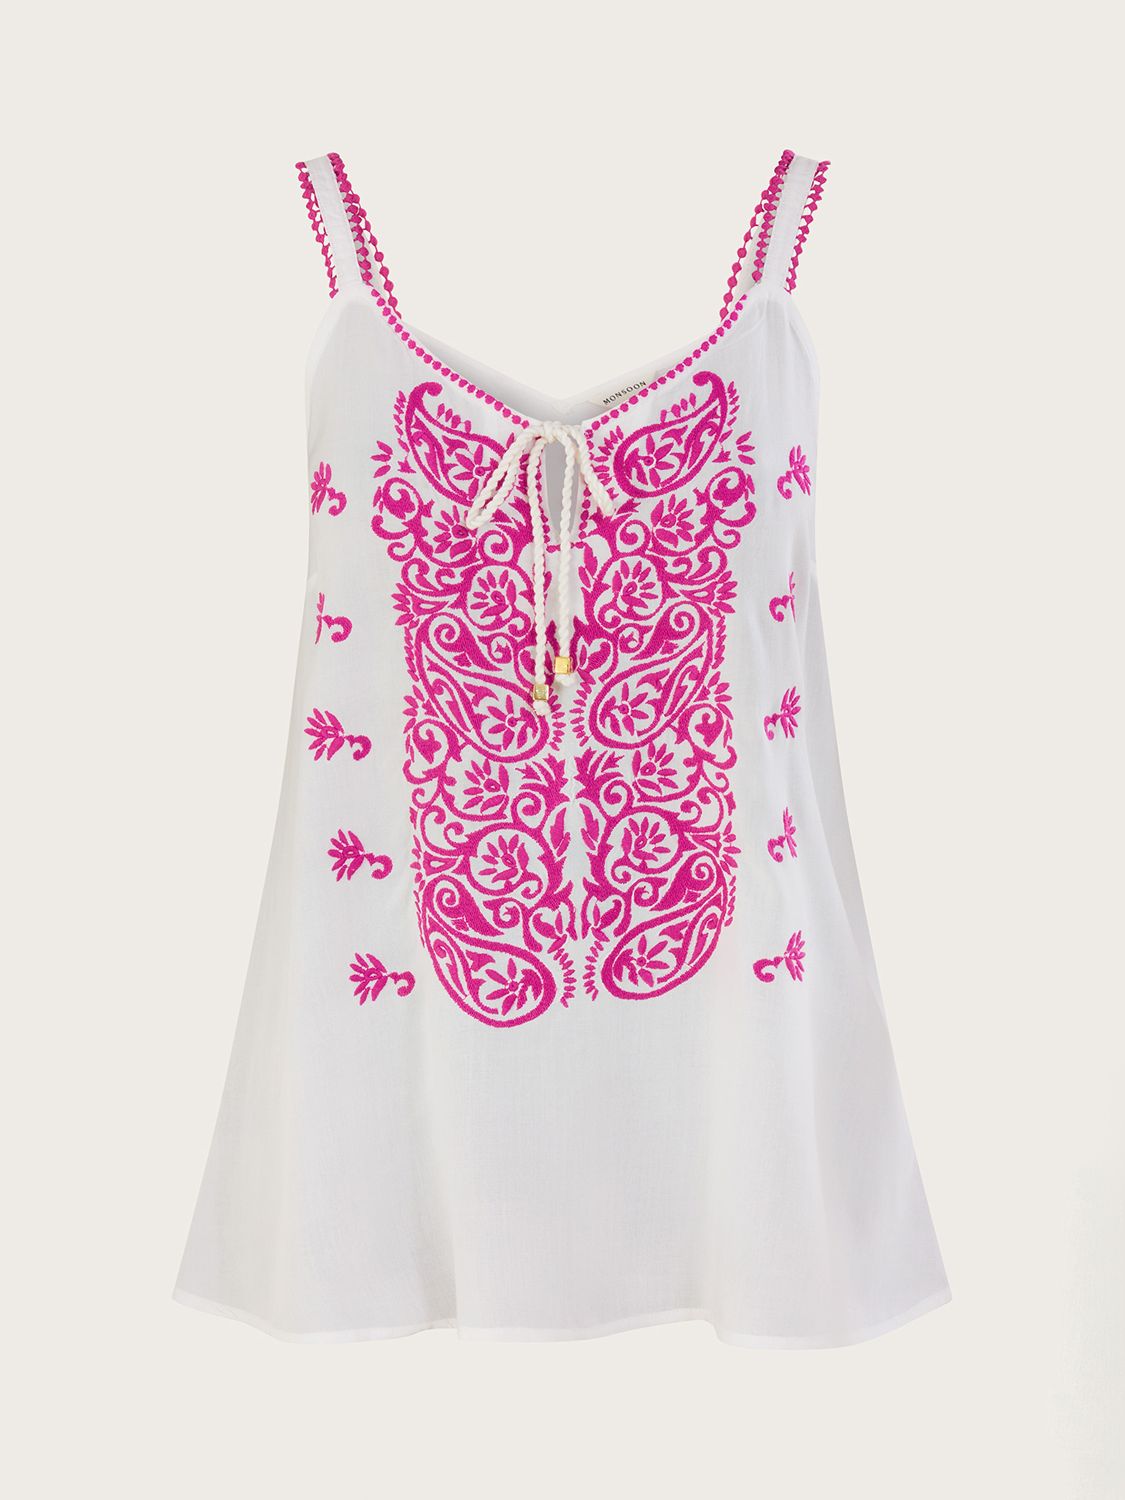 Buy Monsoon Embroidered Cami Sleeveless Top, White/Pink Online at johnlewis.com